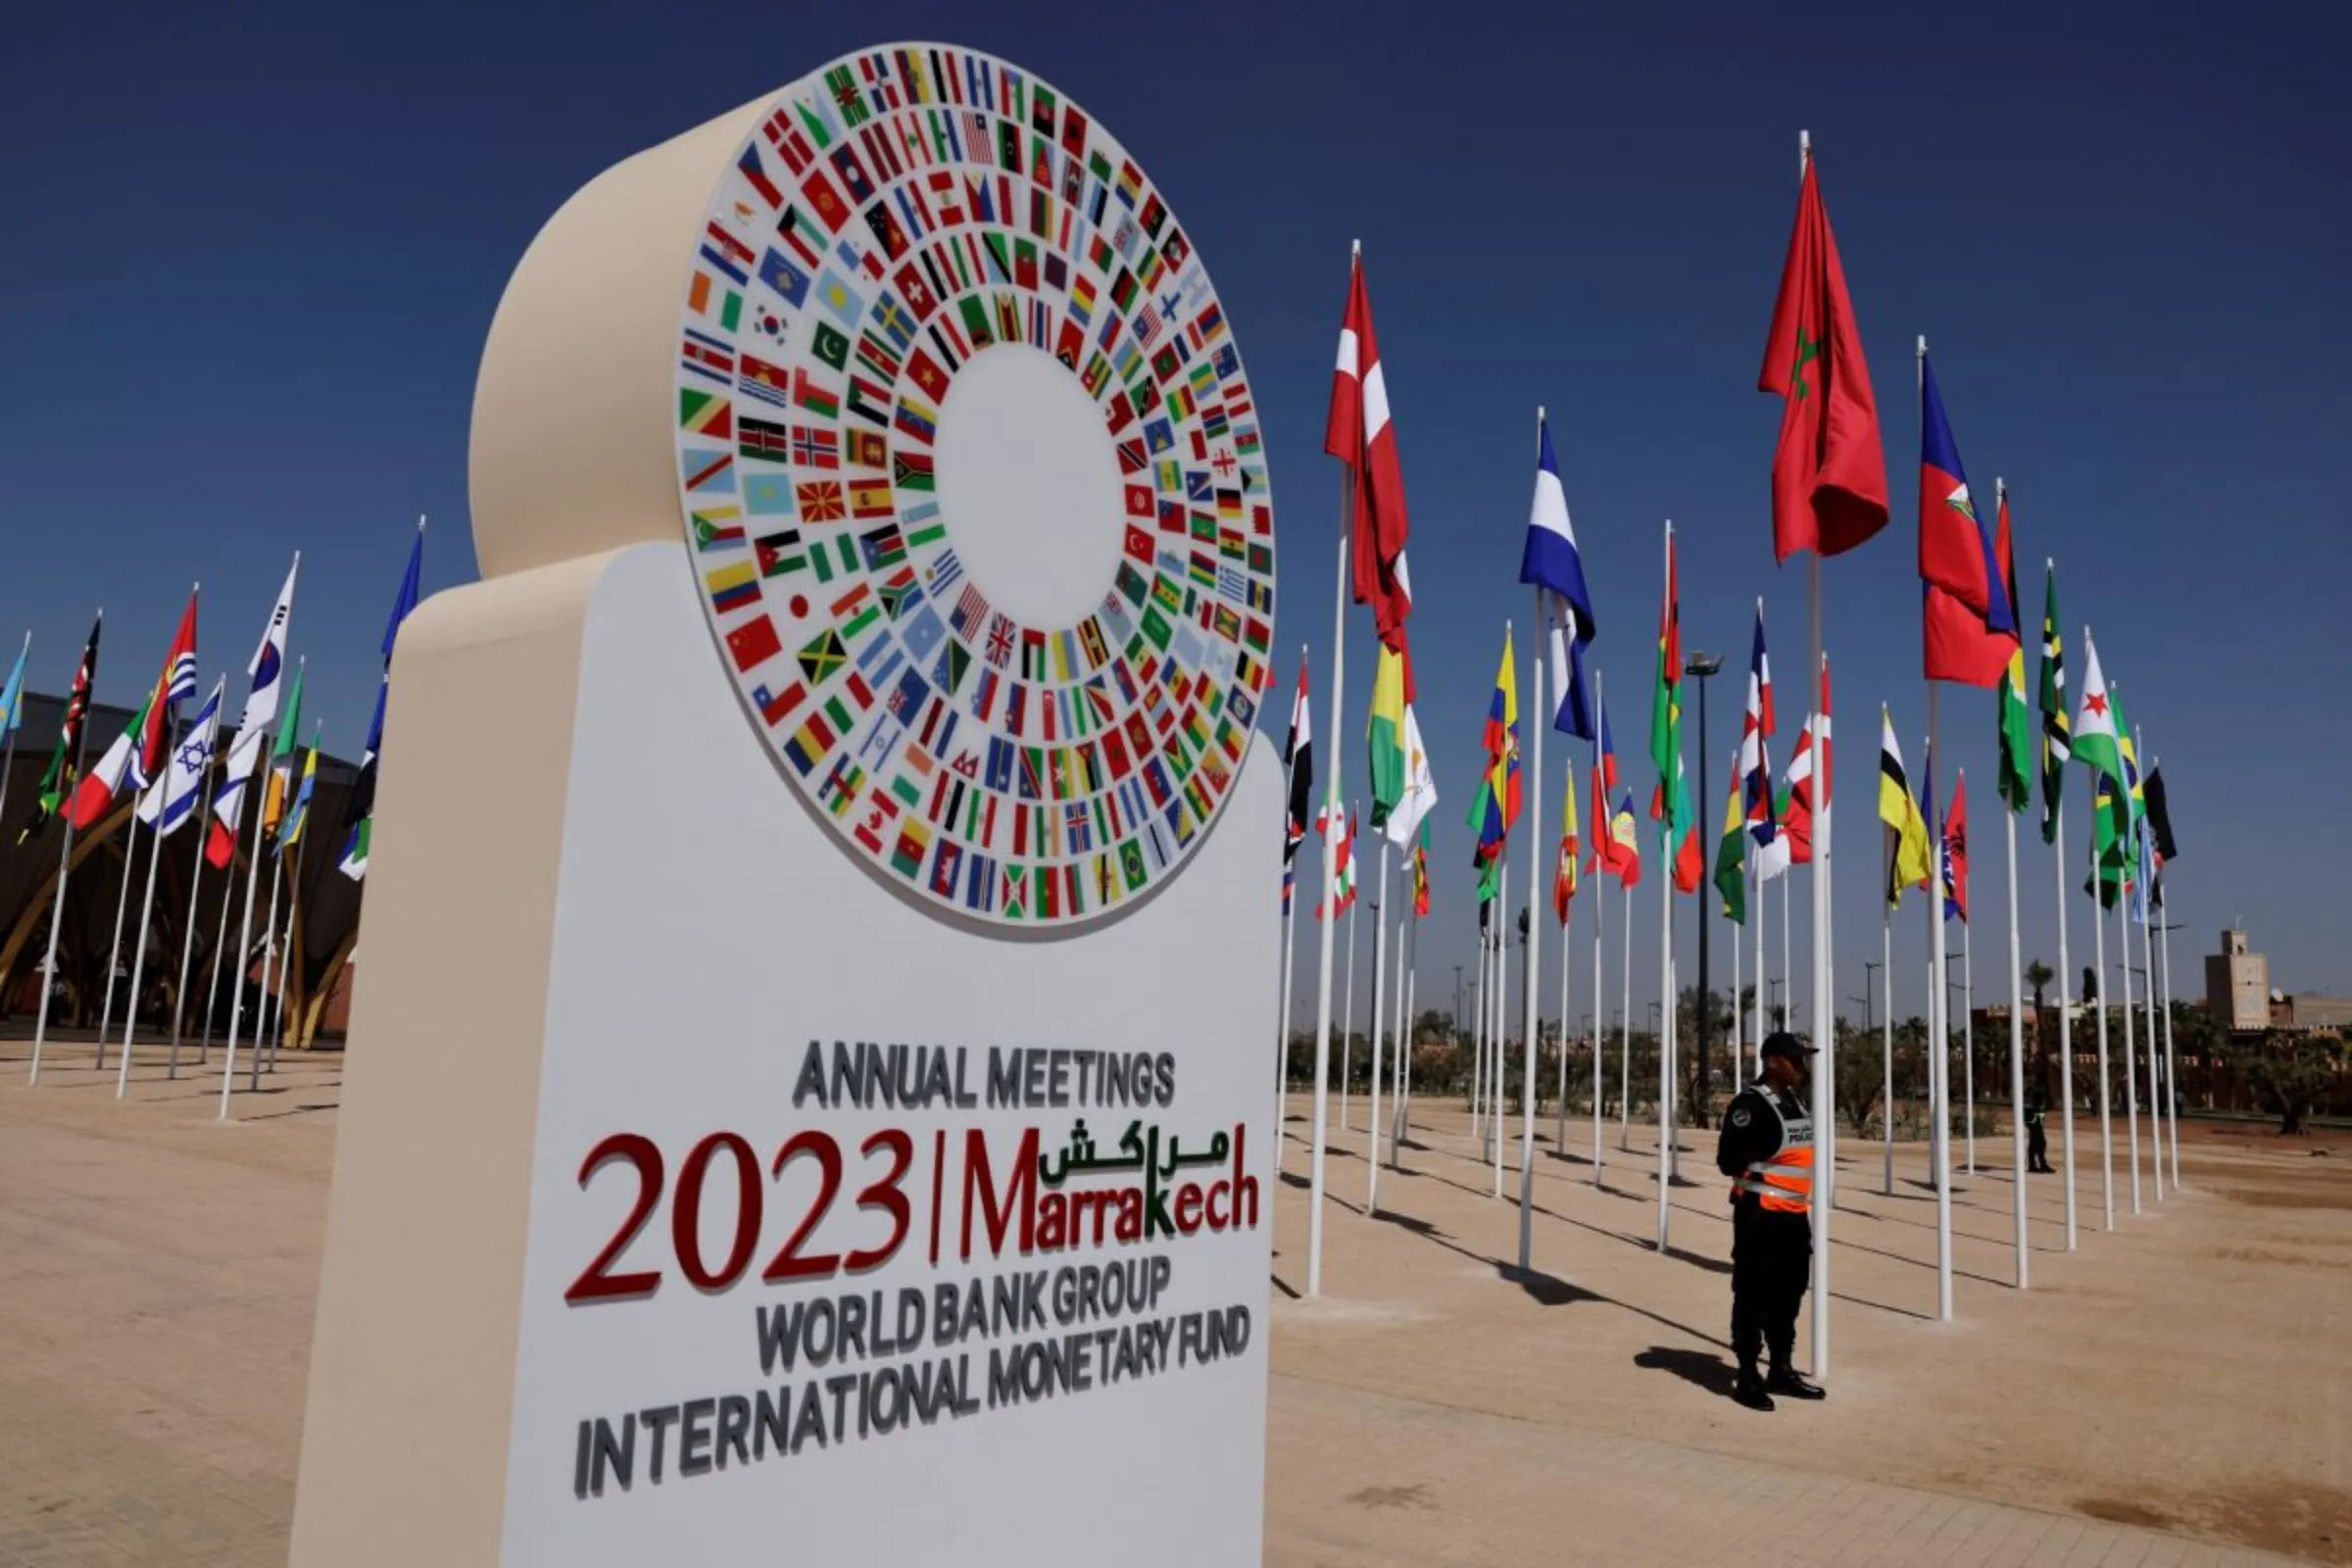 A police officer stands guard next to the main entrance to the venue for the upcoming meetings of the International Monetary Fund and the World Bank, following last month's deadly earthquake, in Marrakech, Morocco October 8, 2023